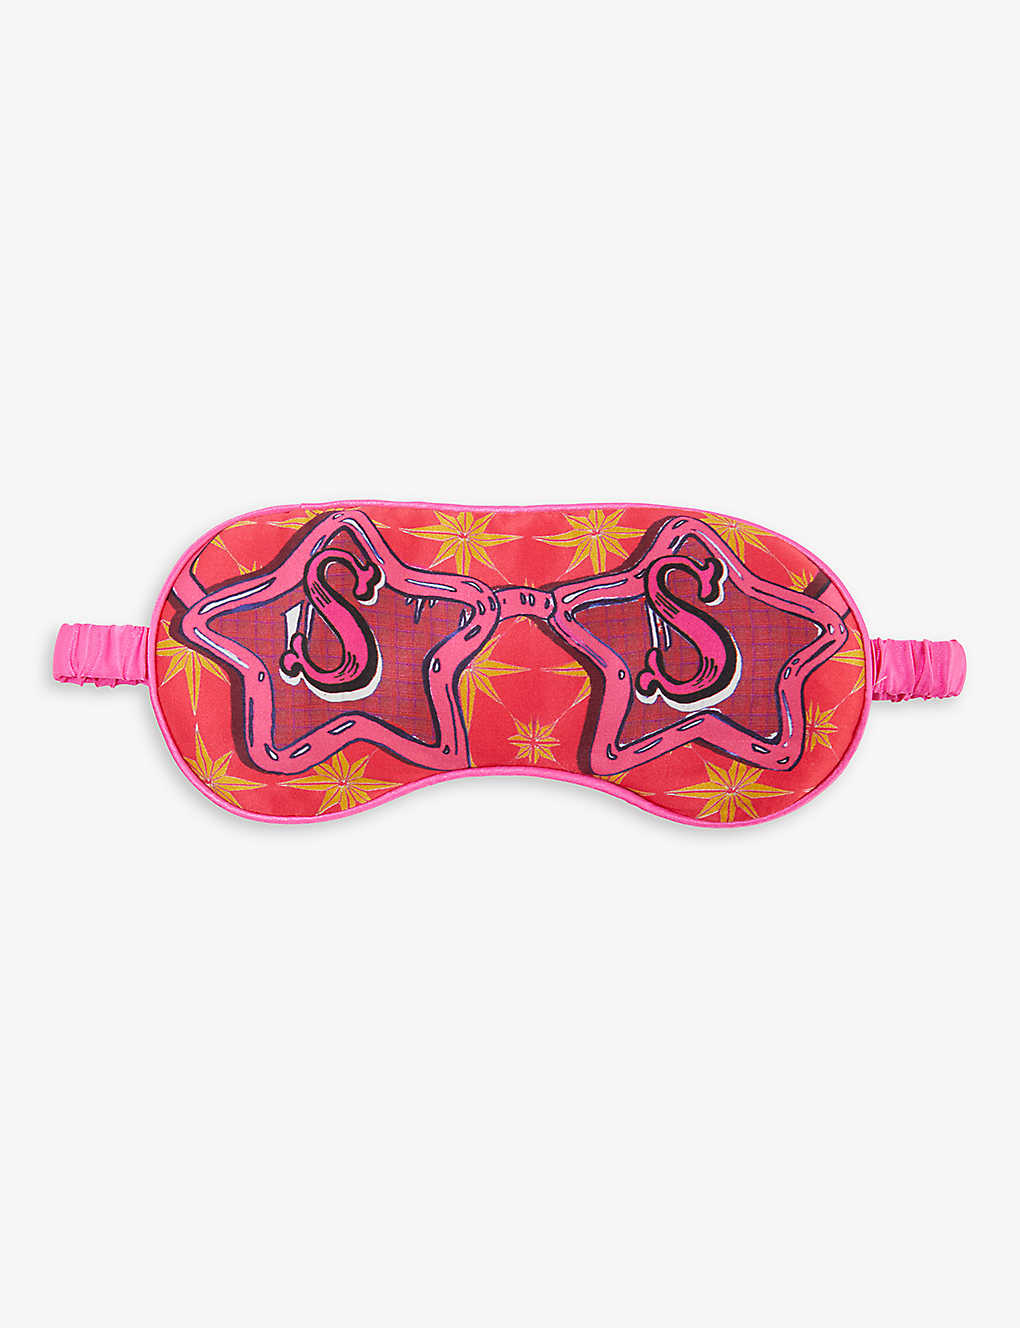 Jessica Russell Womens Multi-coloured S For Sunglasses Patterned Silk Sleep Mask